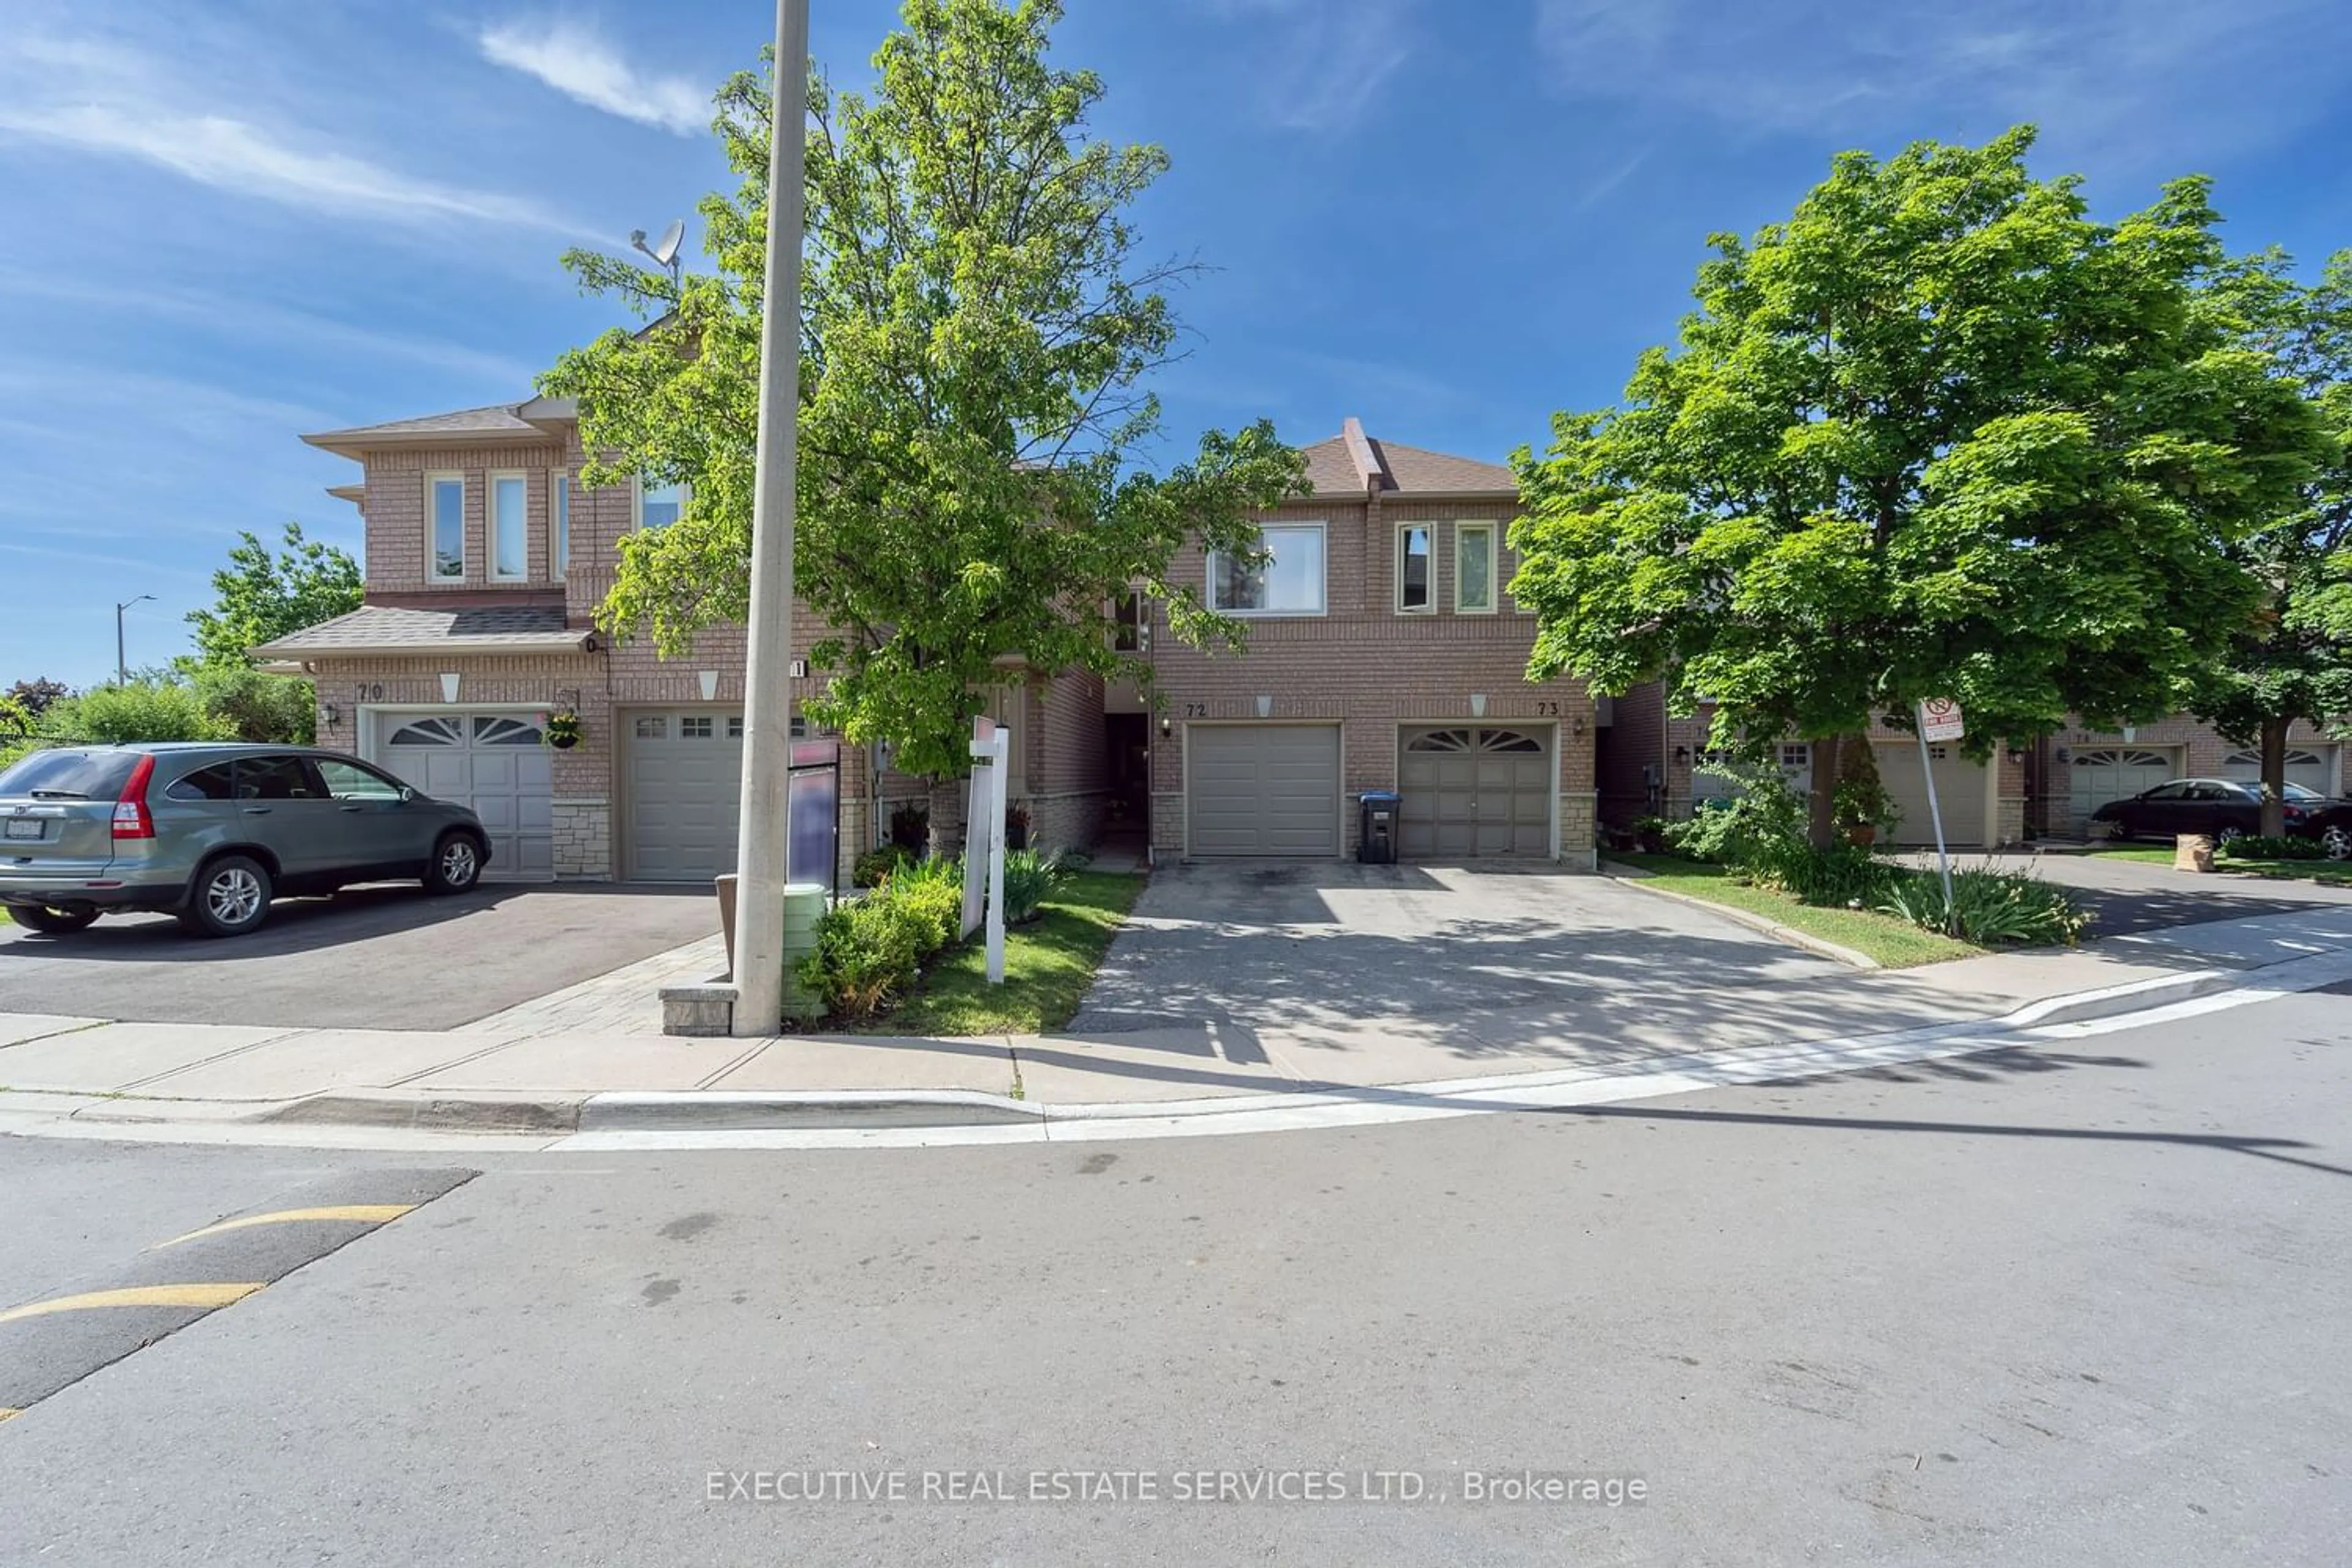 Street view for 5420 Fallingbrook Dr #72, Mississauga Ontario L5V 2H6